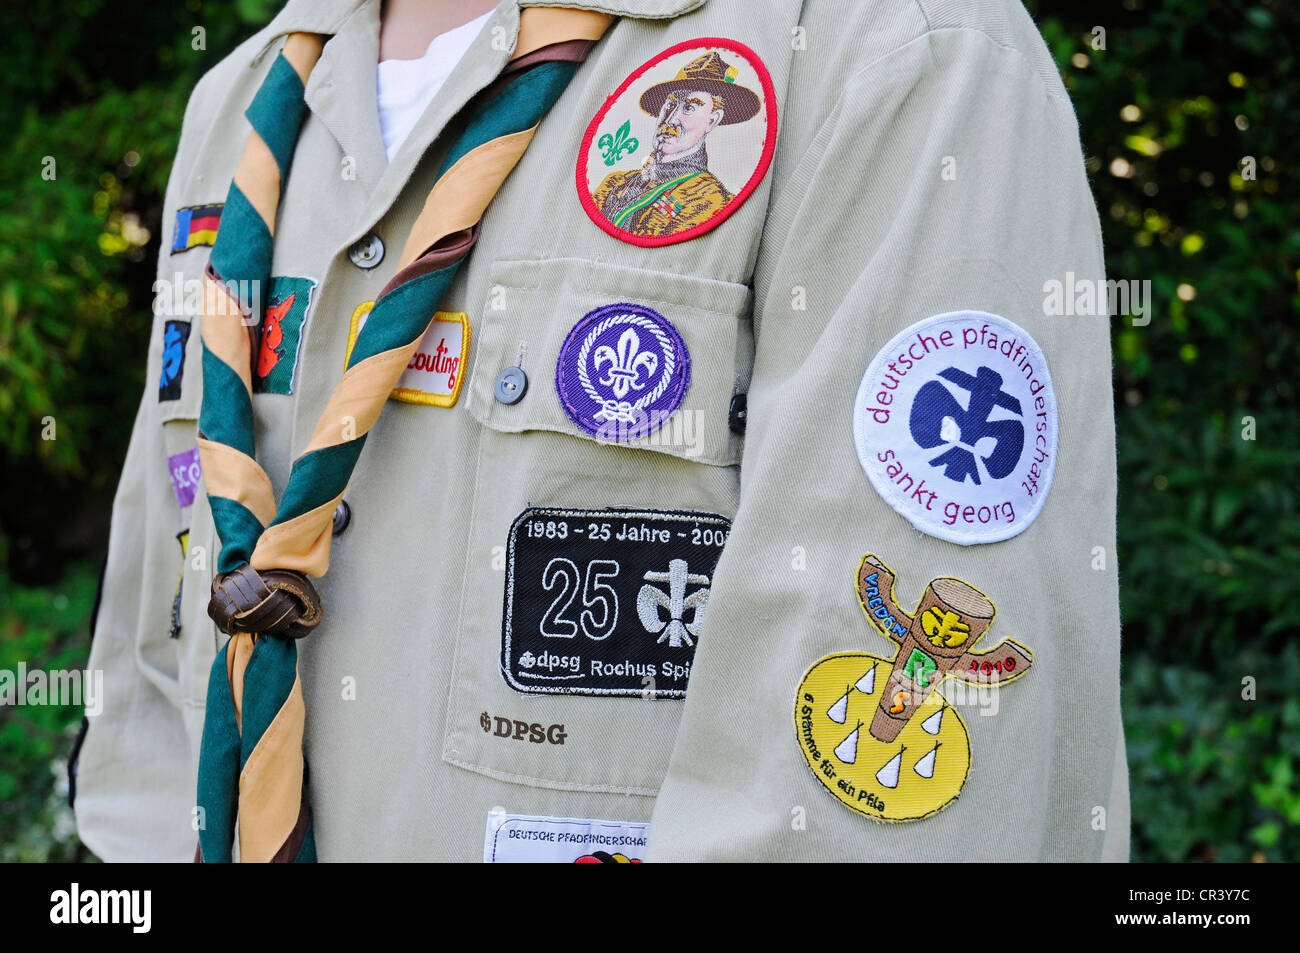 Scouts uniform with badges, neckerchief, Germany, Europe Stock Photo